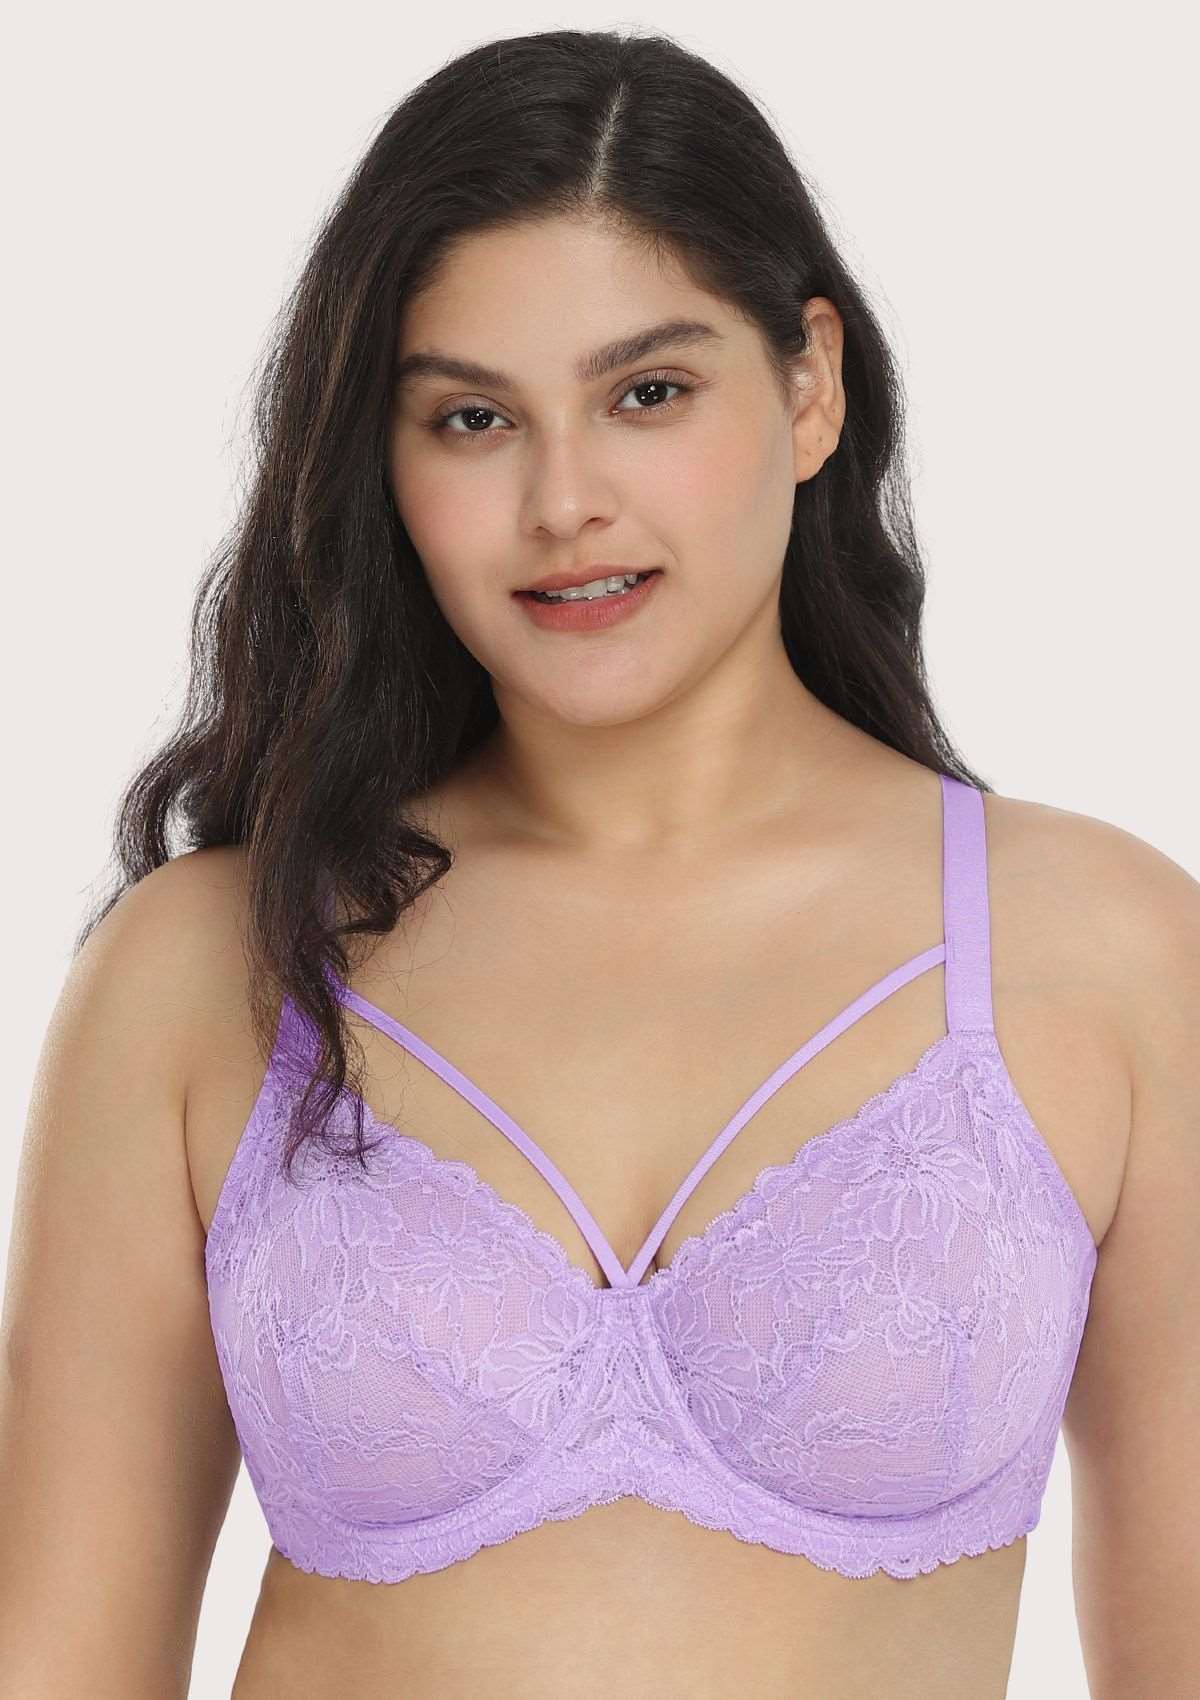 HSIA Pretty In Petals See-Through Lace Bra: Lift And Separate - Purple / 42 / D